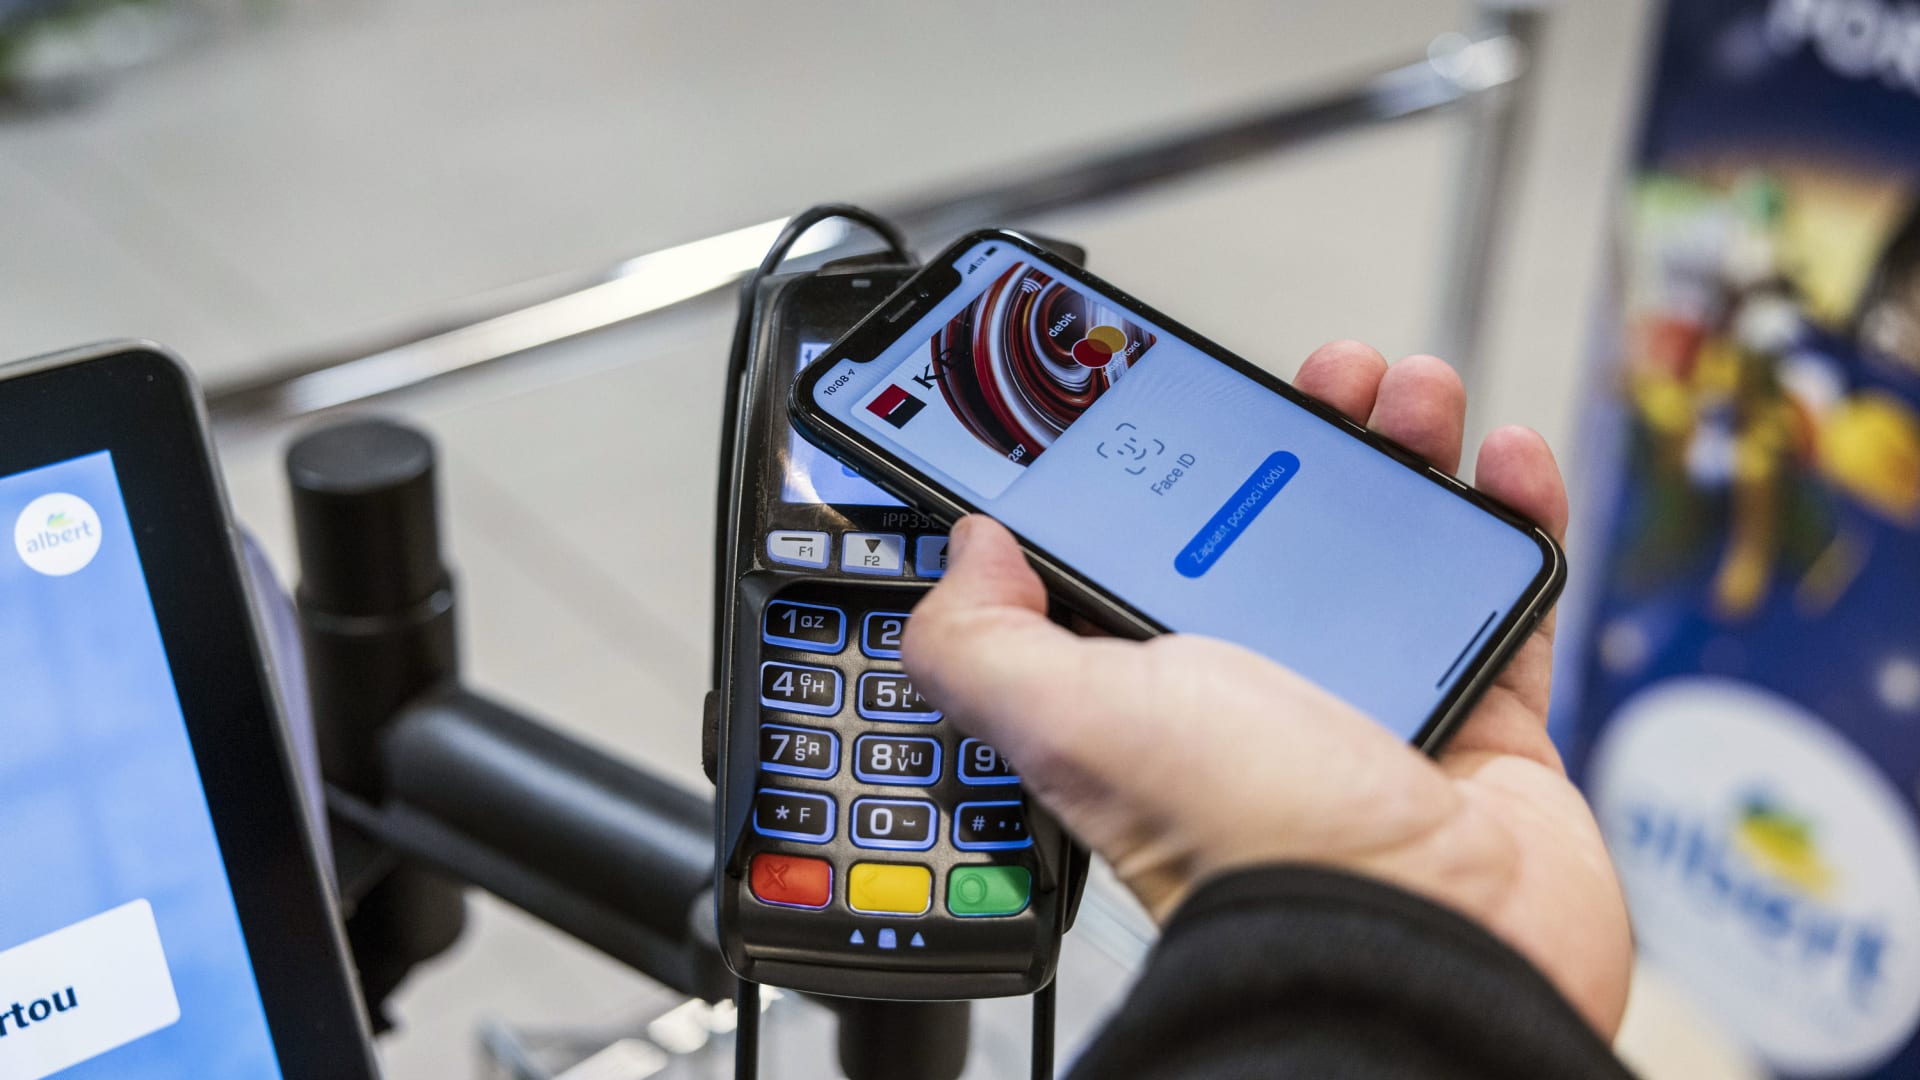 A customer uses Apple Pay at a contactless payment terminal.